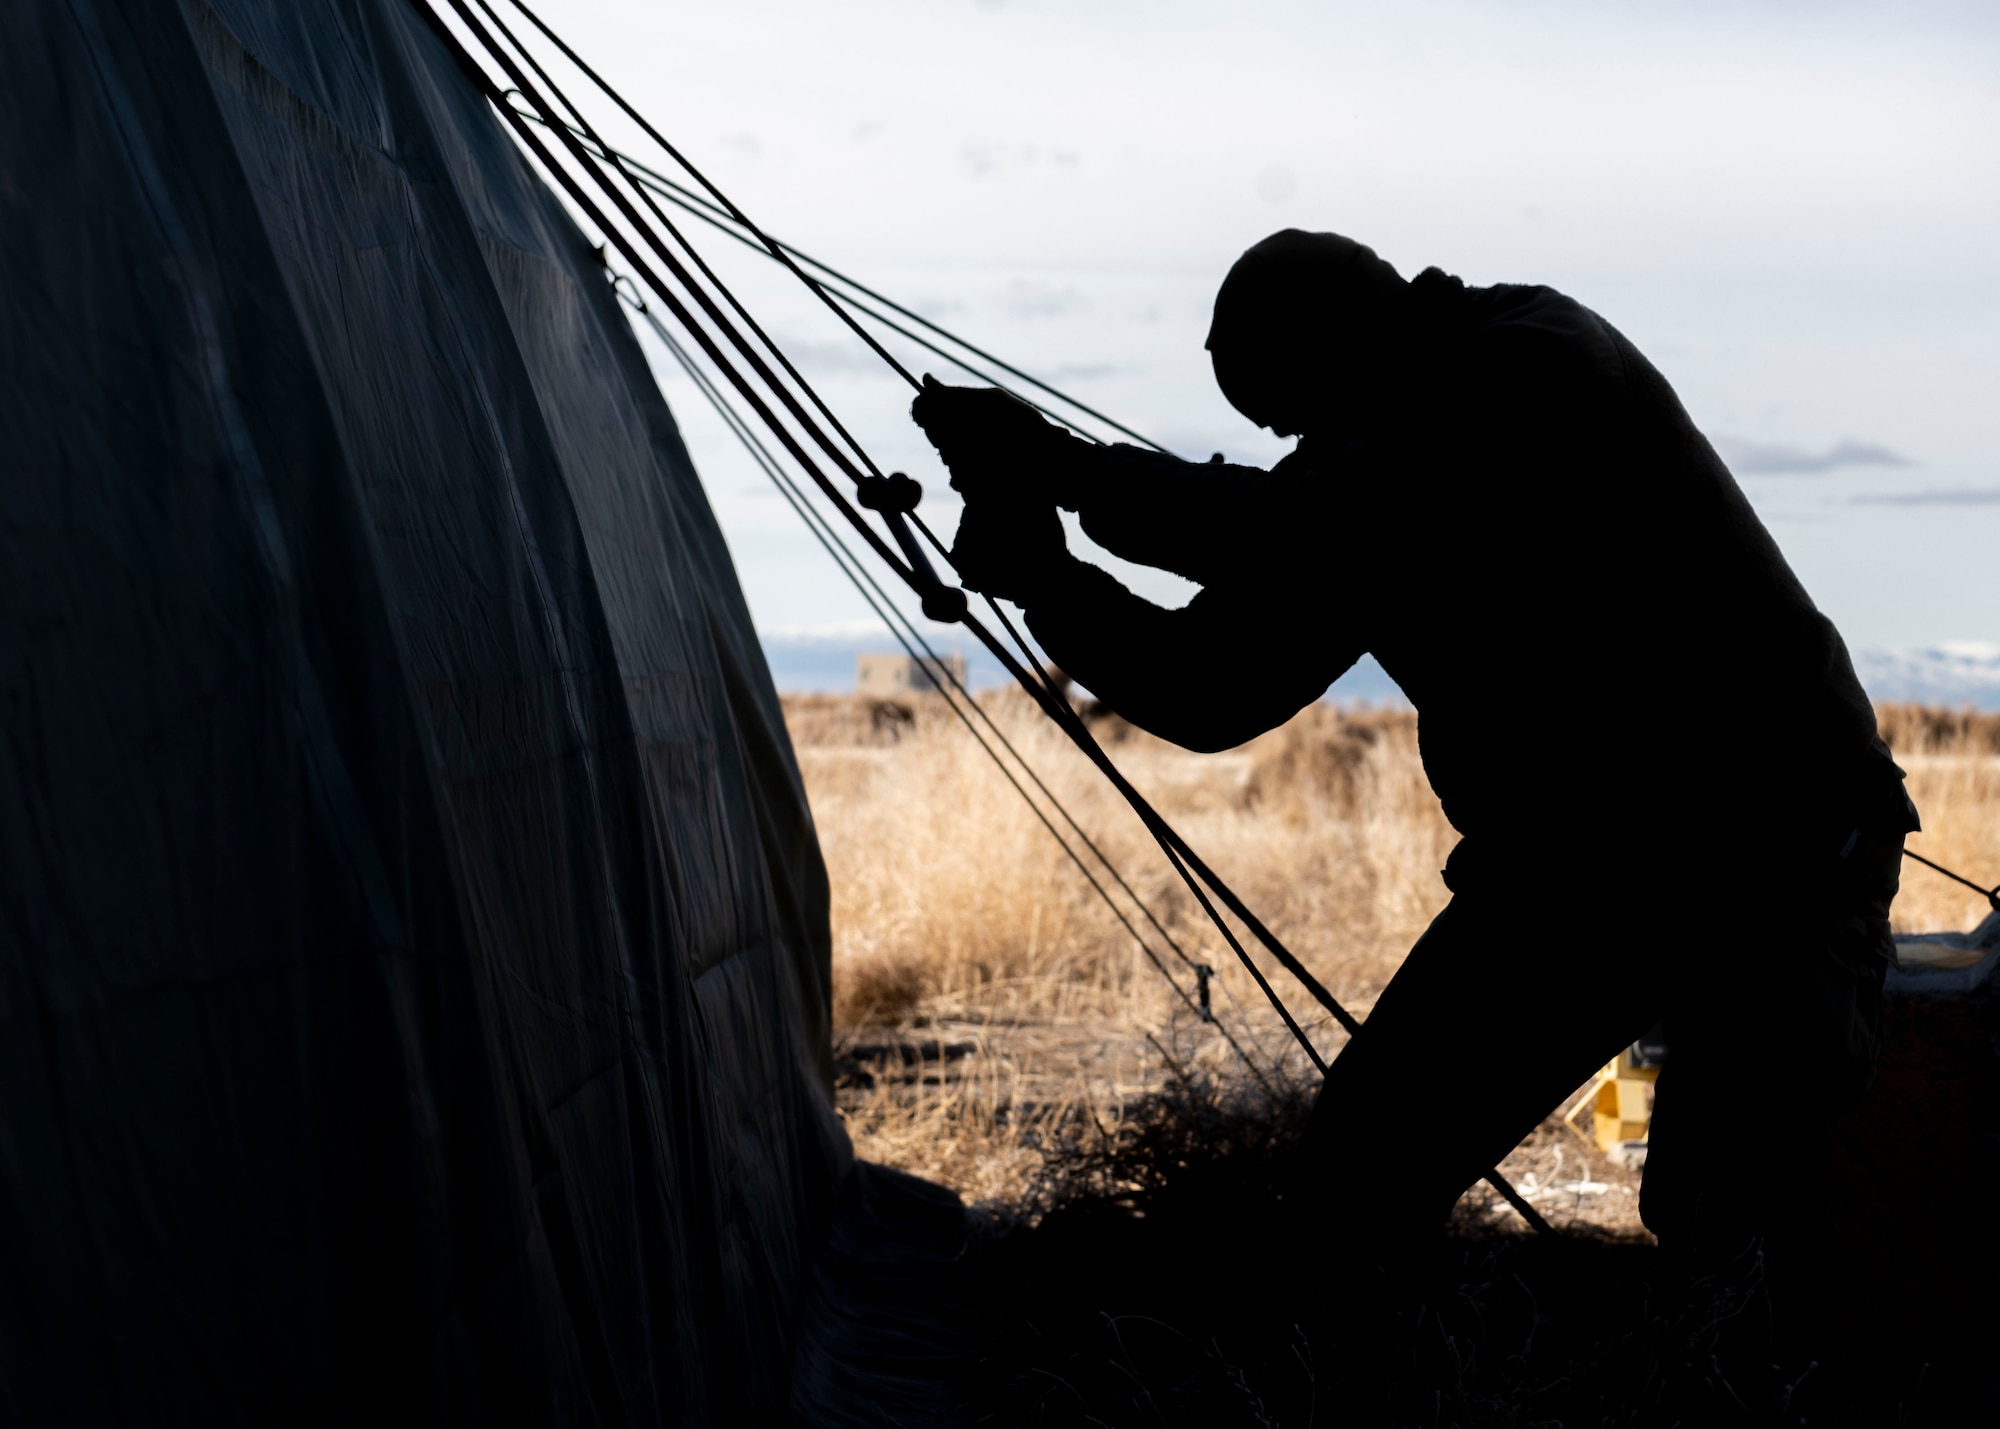 An Airman from the Civil Engineer Squadron hoists a tent grounding line during the Base Emergency Engineer Force training, Jan. 23, 2020, at Mountain Home Air Force Base, Idaho. This training was conducted to equip Airman with skills from other career fields to enhance their readiness. (U.S. Air Force photo by Senior Airman Tyrell Hall)